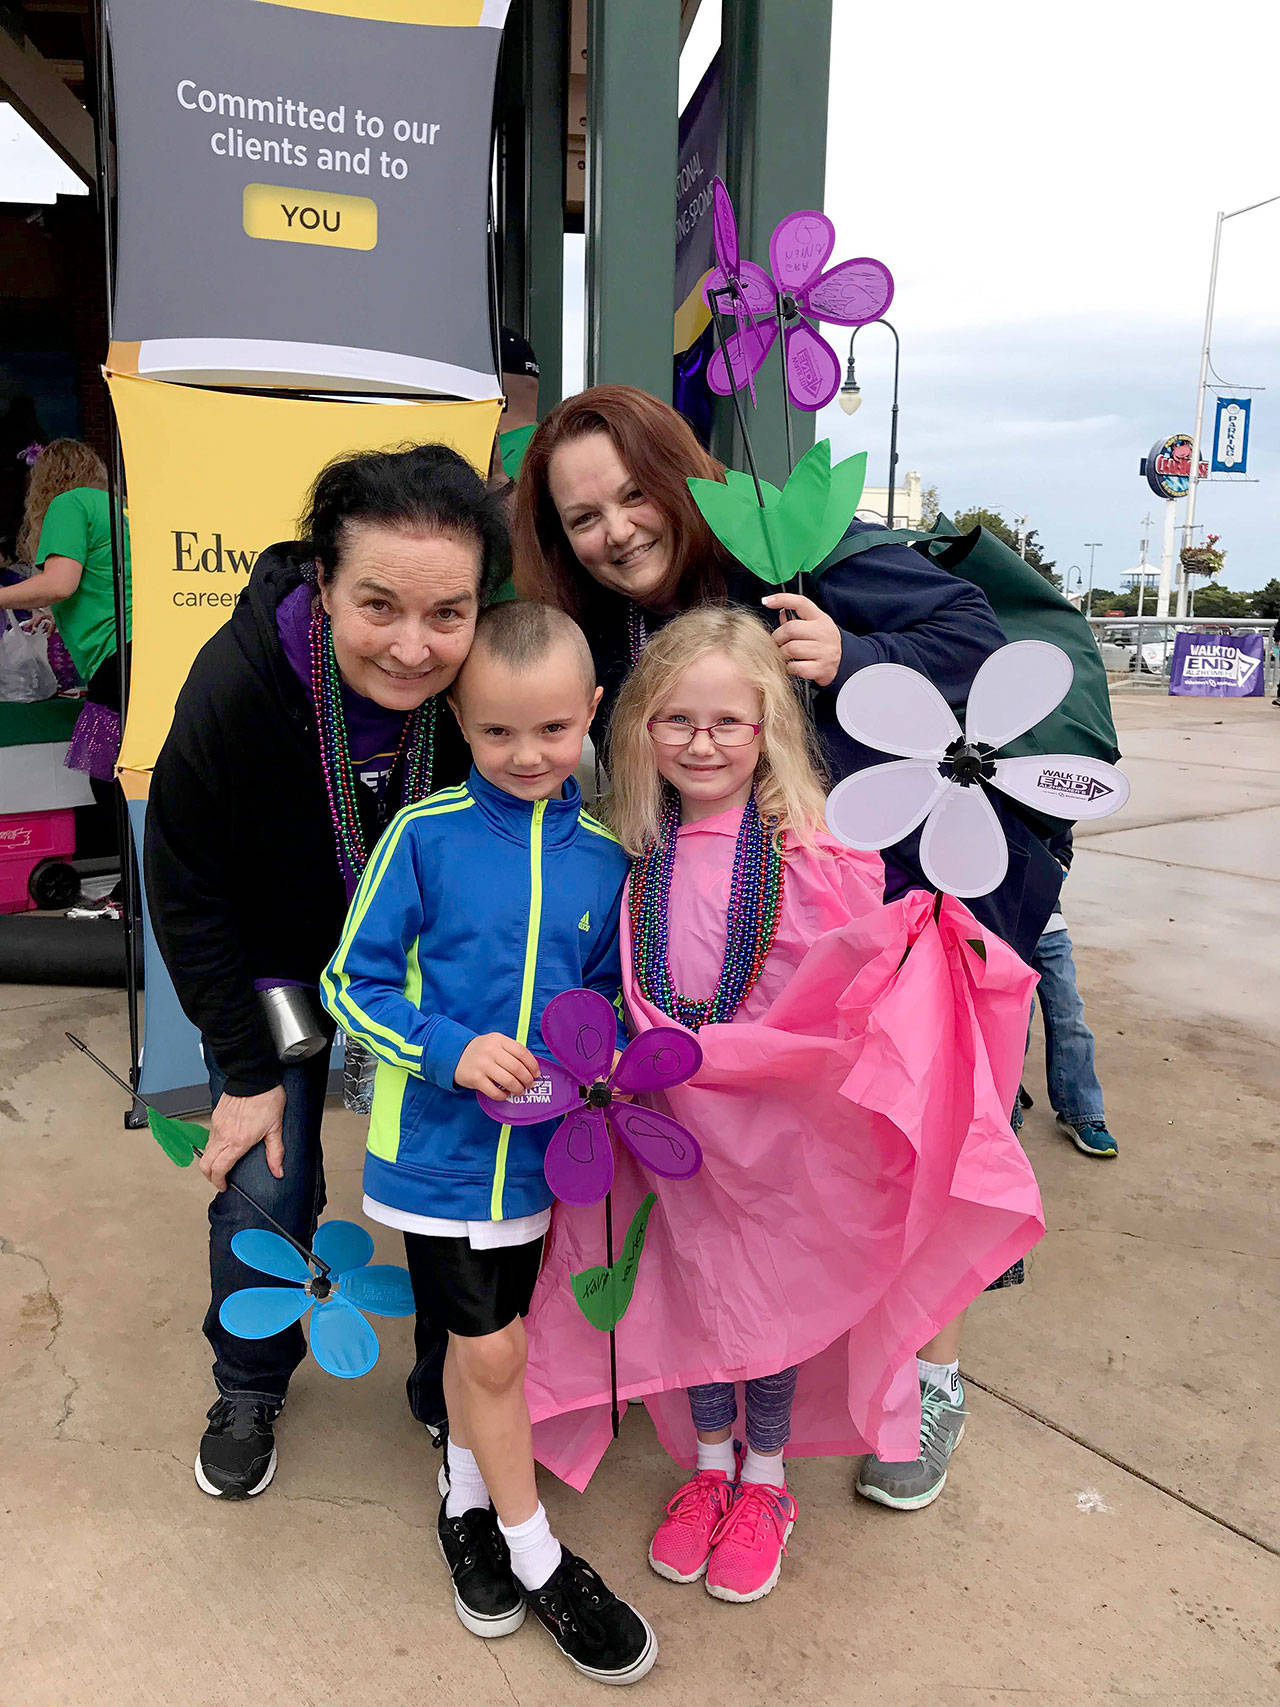 Michele Devlin of Sequim, pictured here with her mother Debi Turner and her twin children, will be participating in the North Olympic Peninsula Walk to End Alzheimer’s for the third year in a row. She walks in honor of her mom, Debi Turner, who lost her battle with Alzheimer’s disease and breast cancer in December 2018. Submitted photo